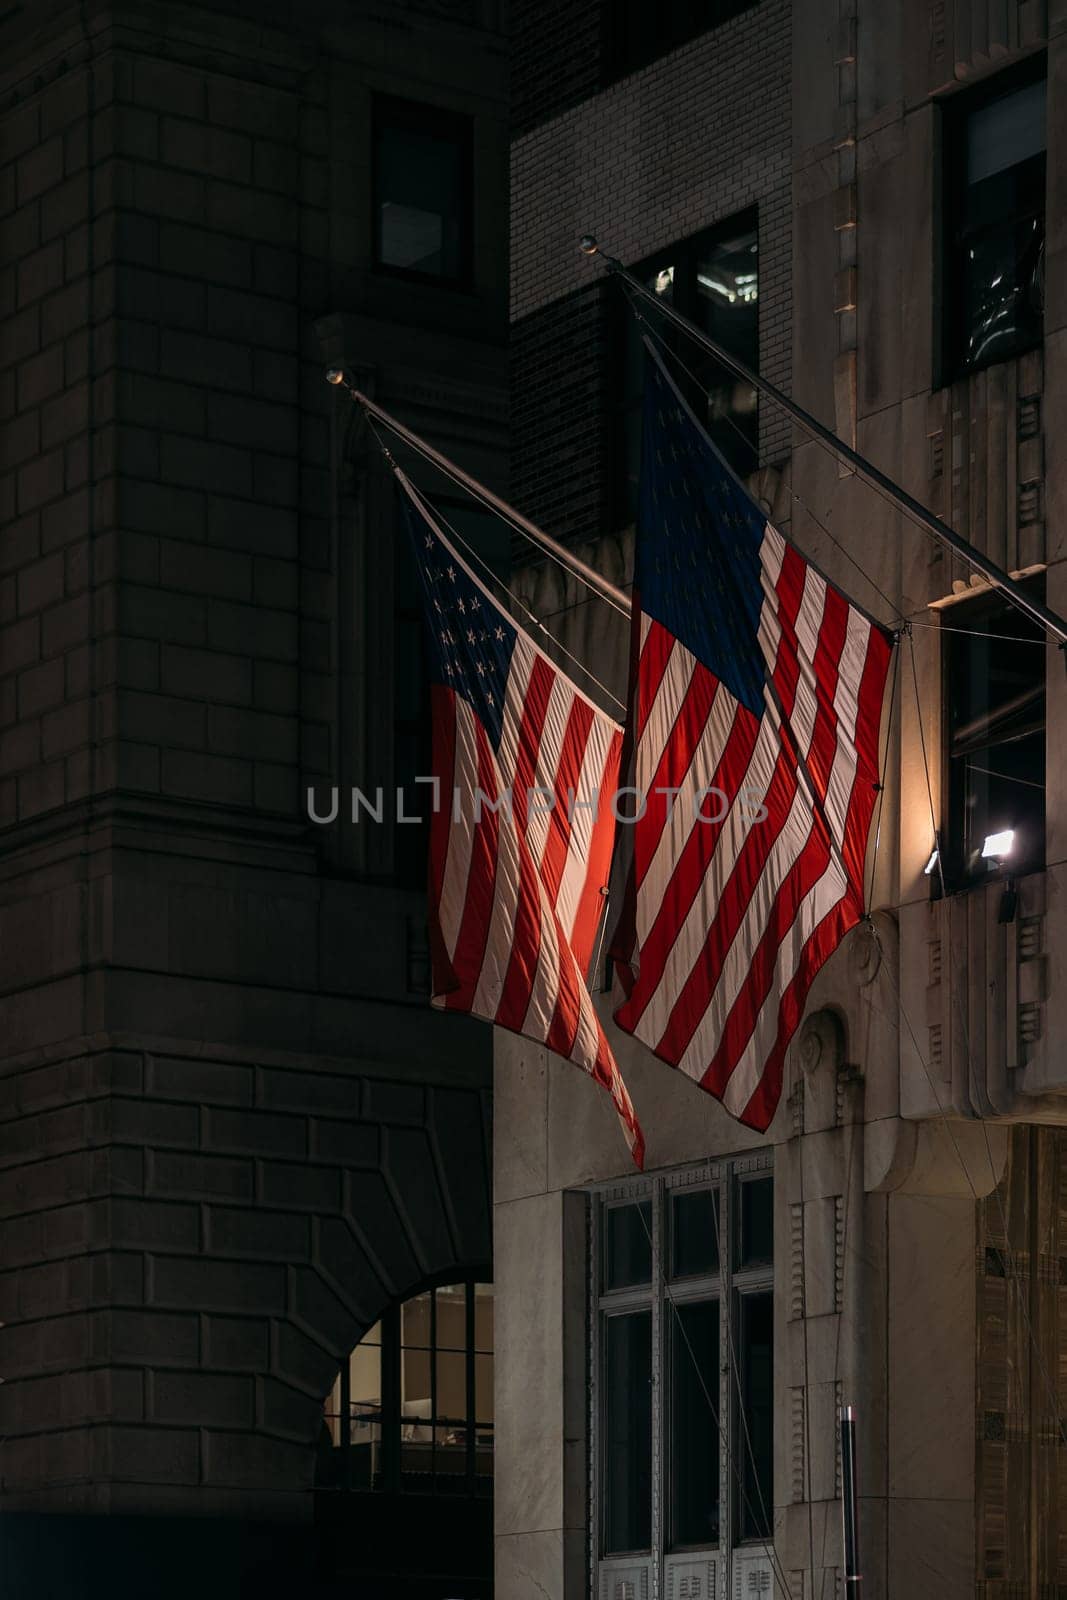 American Flags Illuminated at Night on New York Building Facade by apavlin